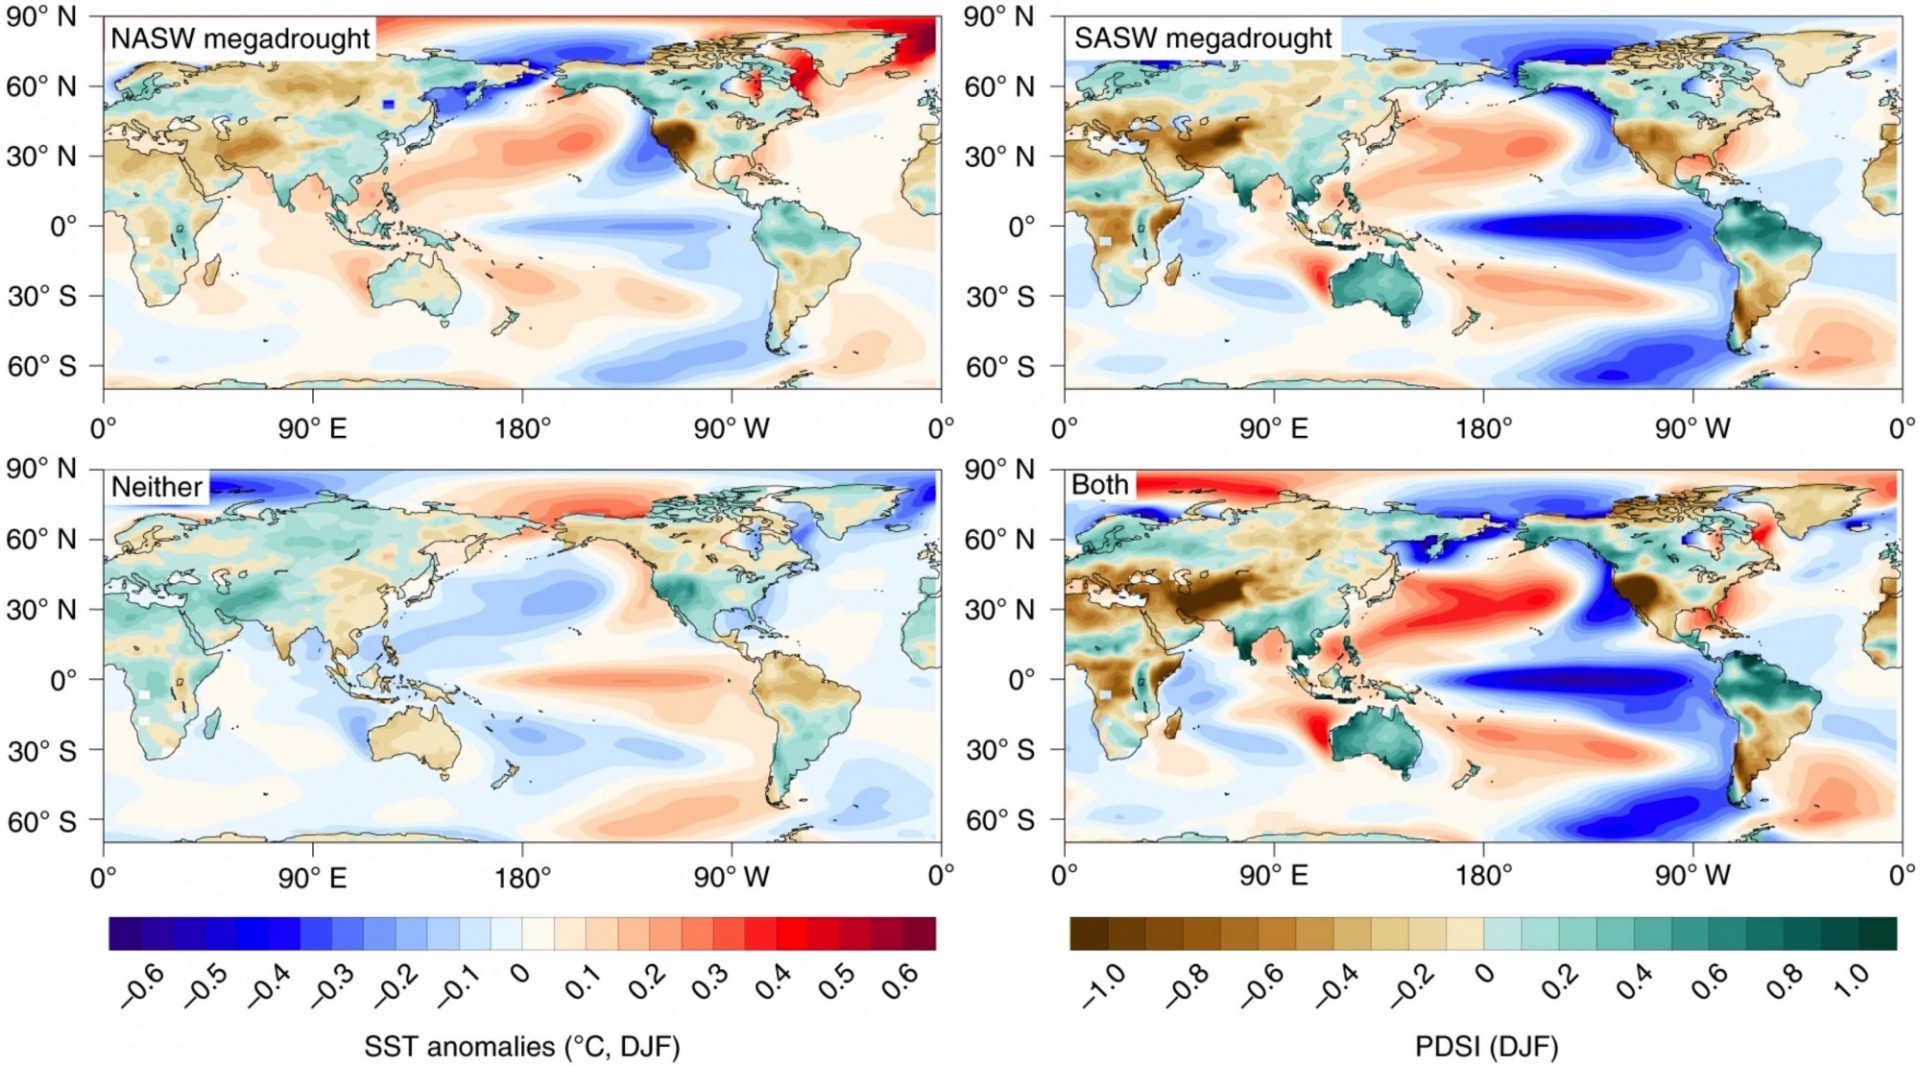 Composites of DJF SST and PDSI from PHYDA for all years corresponding to NASW megadrought conditions, SASW megadrought conditions, when megadroughts do not exist in either location (Neither) and when megadroughts exist in both locations (Both). Temperature and PDSI data are anomalies with respect to the analysis period 1000–1925 CE.